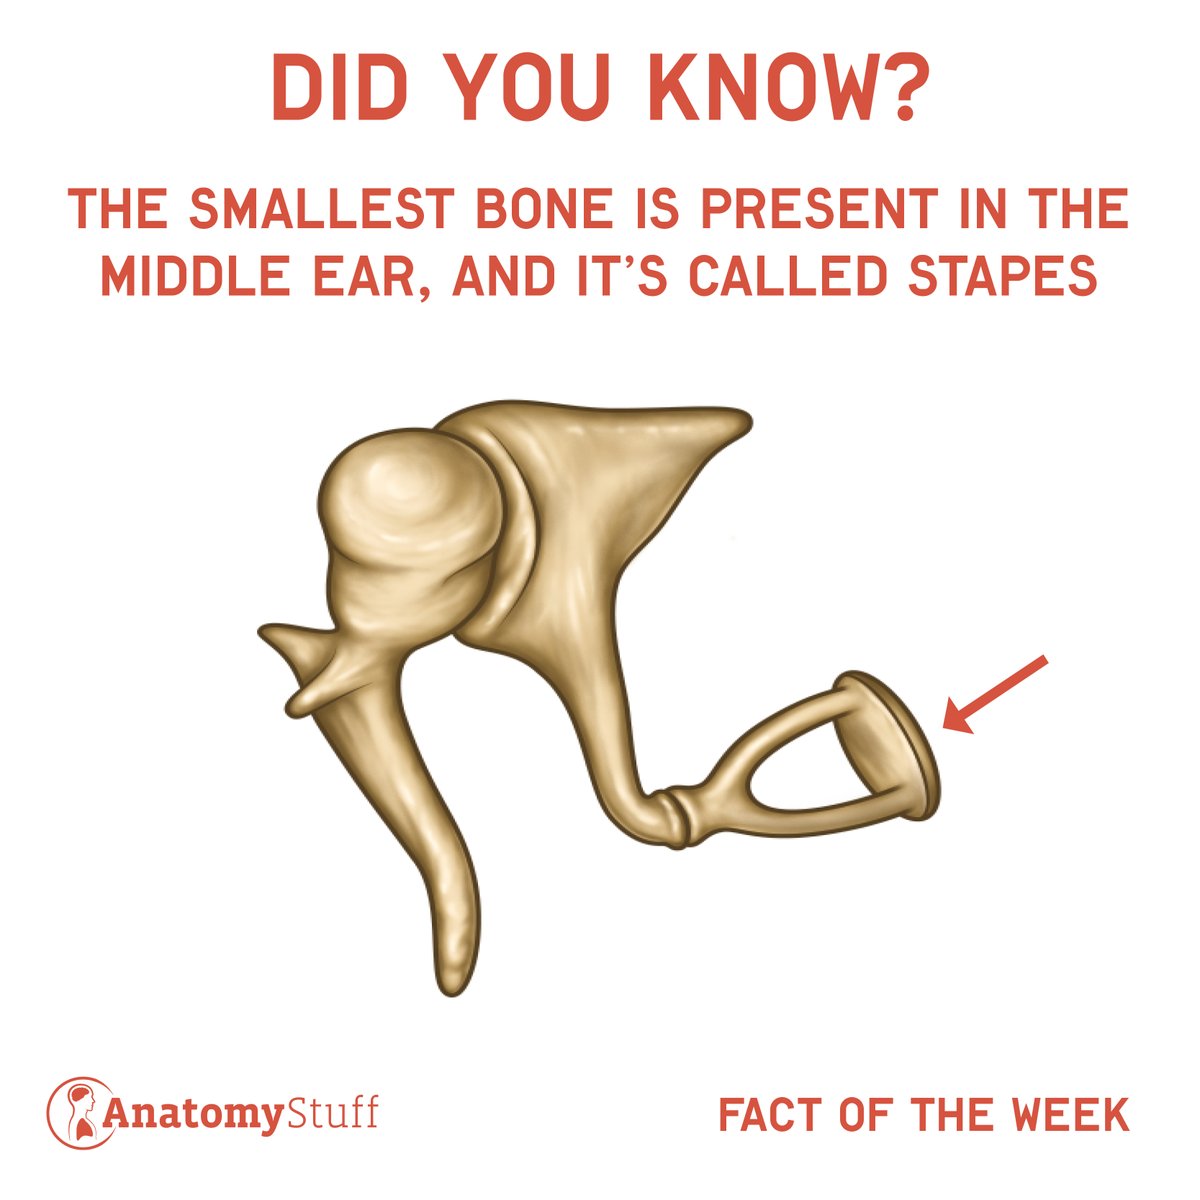 The smallest bone is present in the middle ear, and it is called stapes. Its size is 3mm×2.5mm. 
#AnatomyStuff #anatomy #bonesinthebody #anatomyfacts